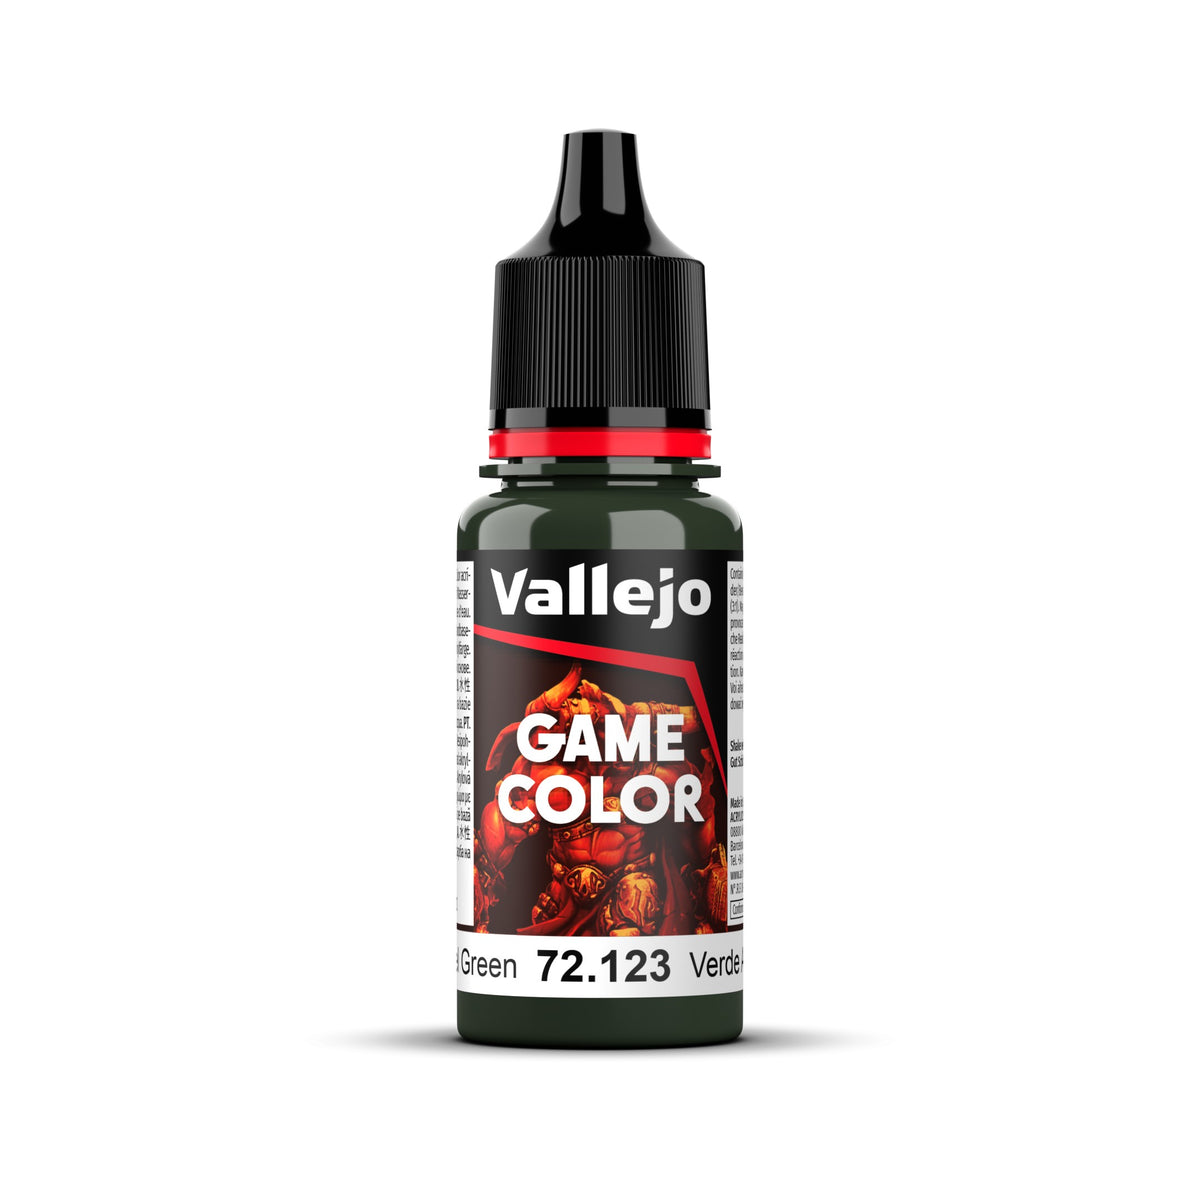 Vallejo Game Colour Angel Green 18ml